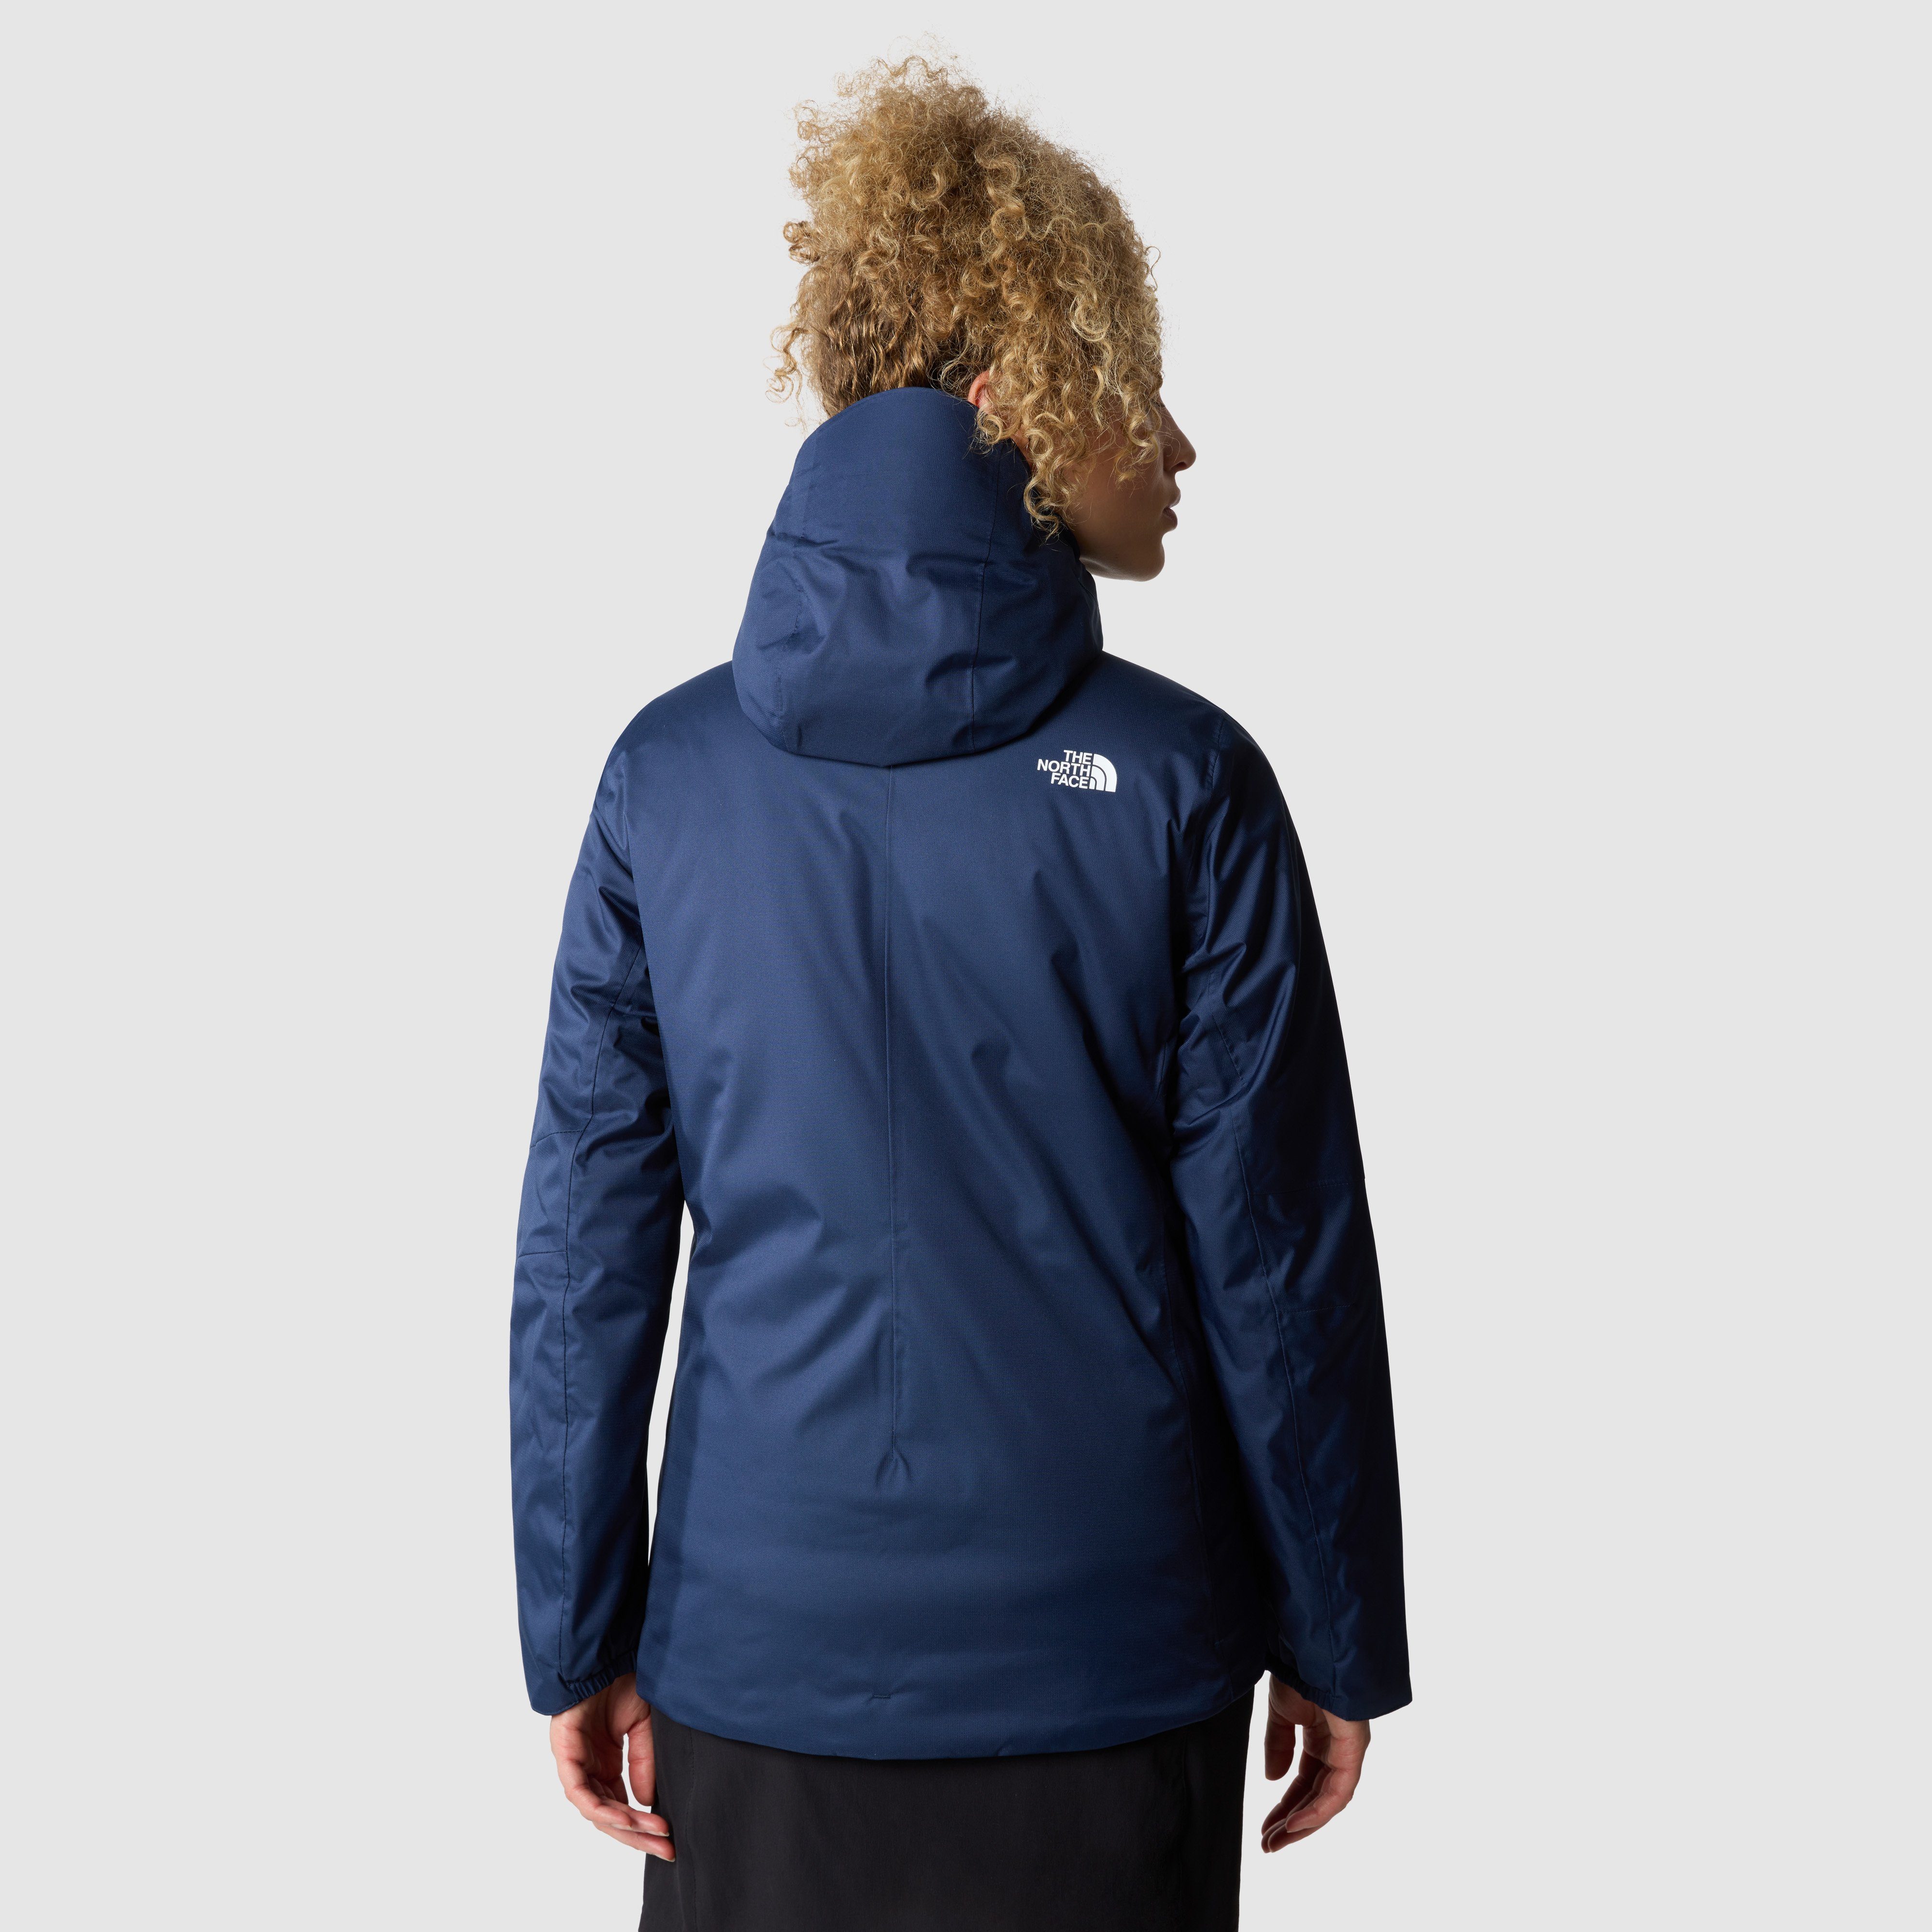 Logodruck The W mit QUEST North JACKET Funktionsjacke INSULATED Face